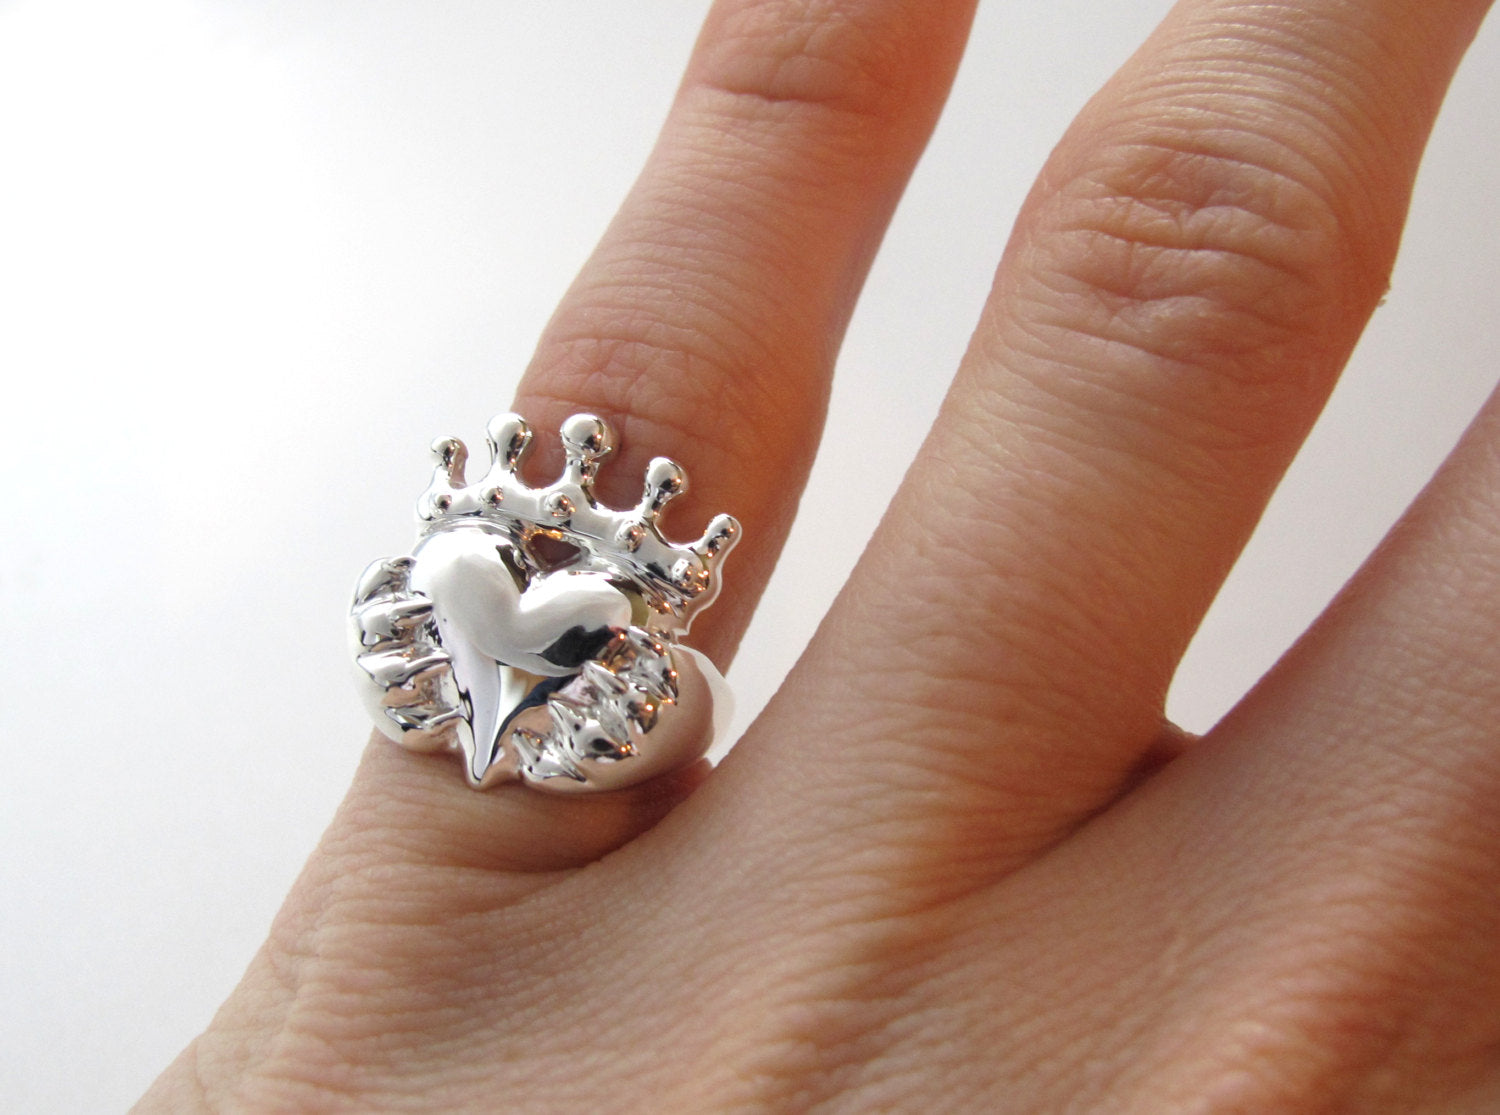 King and Queen Rings for Couples - 2pcs His Hers Stainless Steel Matching  Ring Sets for Him